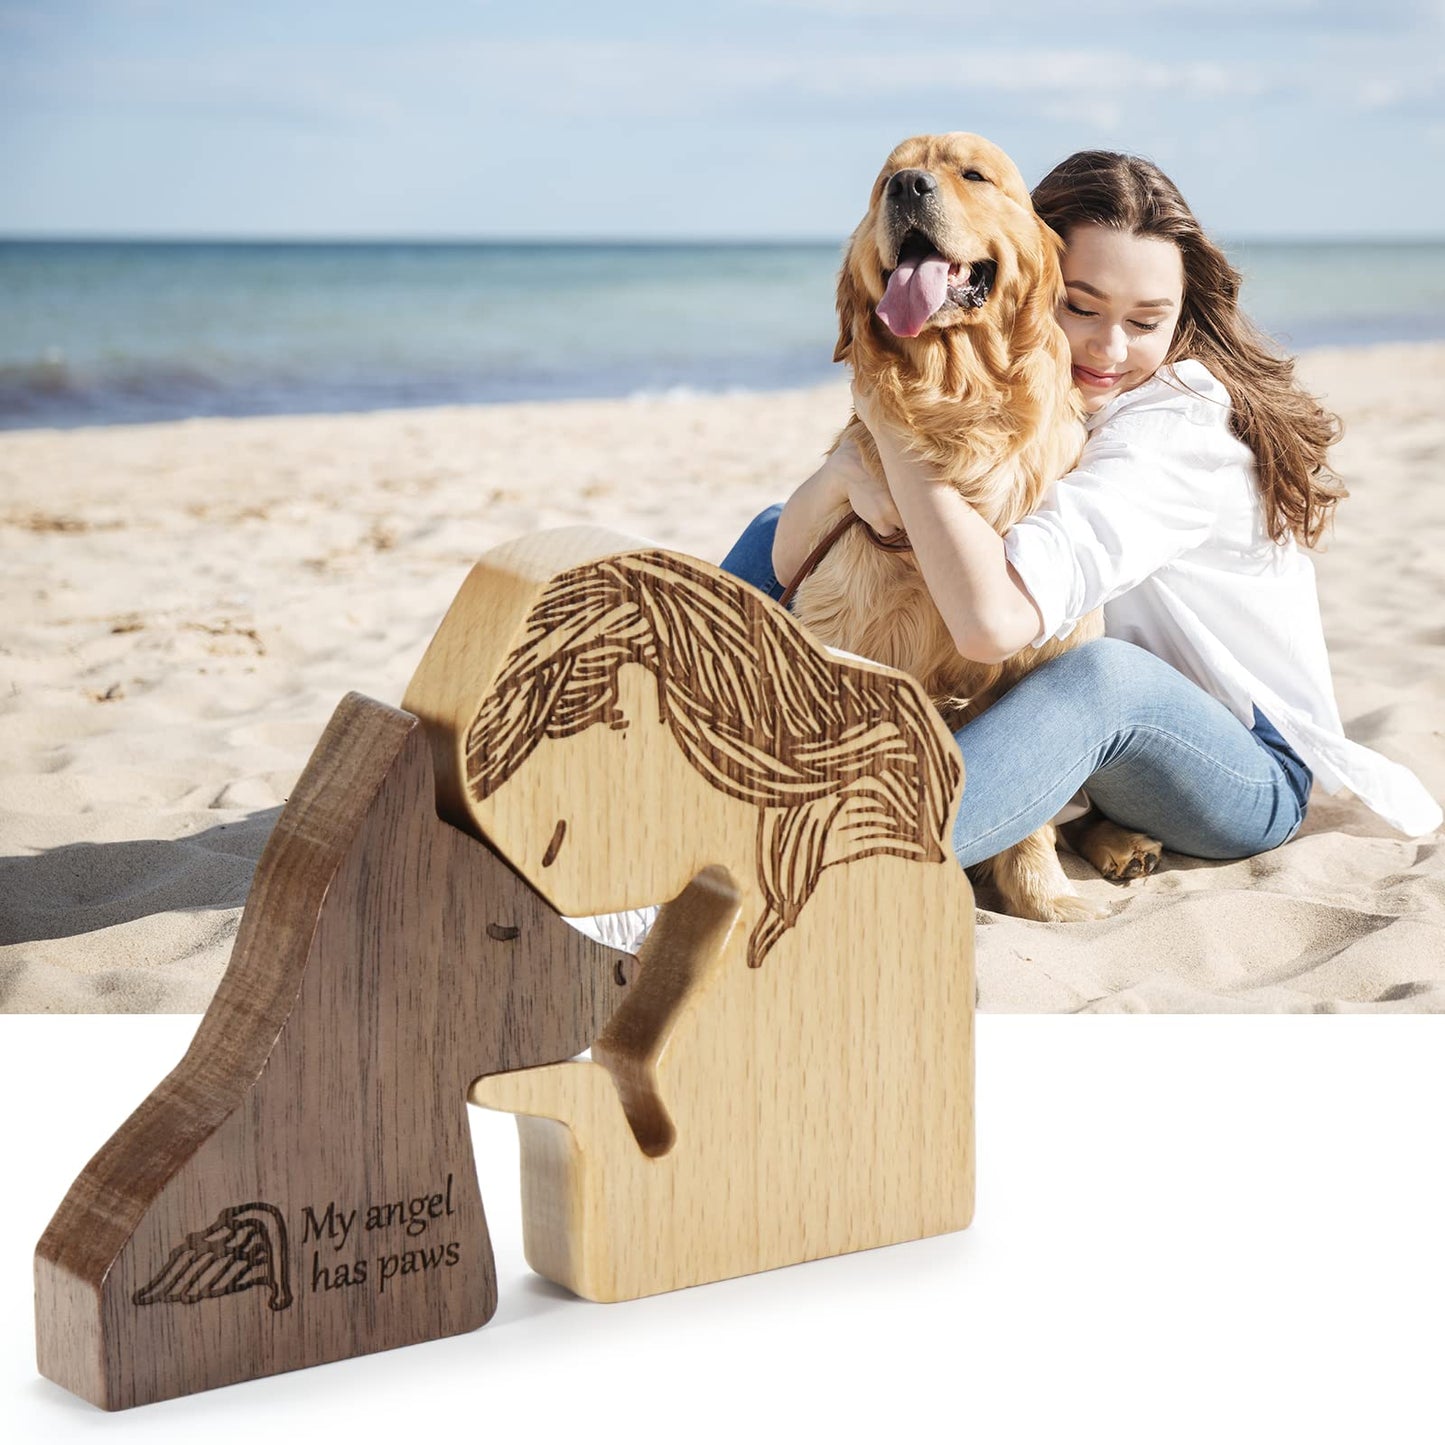 THYGIFTREE Dog Memorial Gifts for Women, Loss of Dog Gifts, Dog Remembrance Gift for Dog Passing Away, Pet Sympathy Gifts for Dogs, Dog Figurines Decor for Dog Mom, Pet Memorial Gifts for Condolence